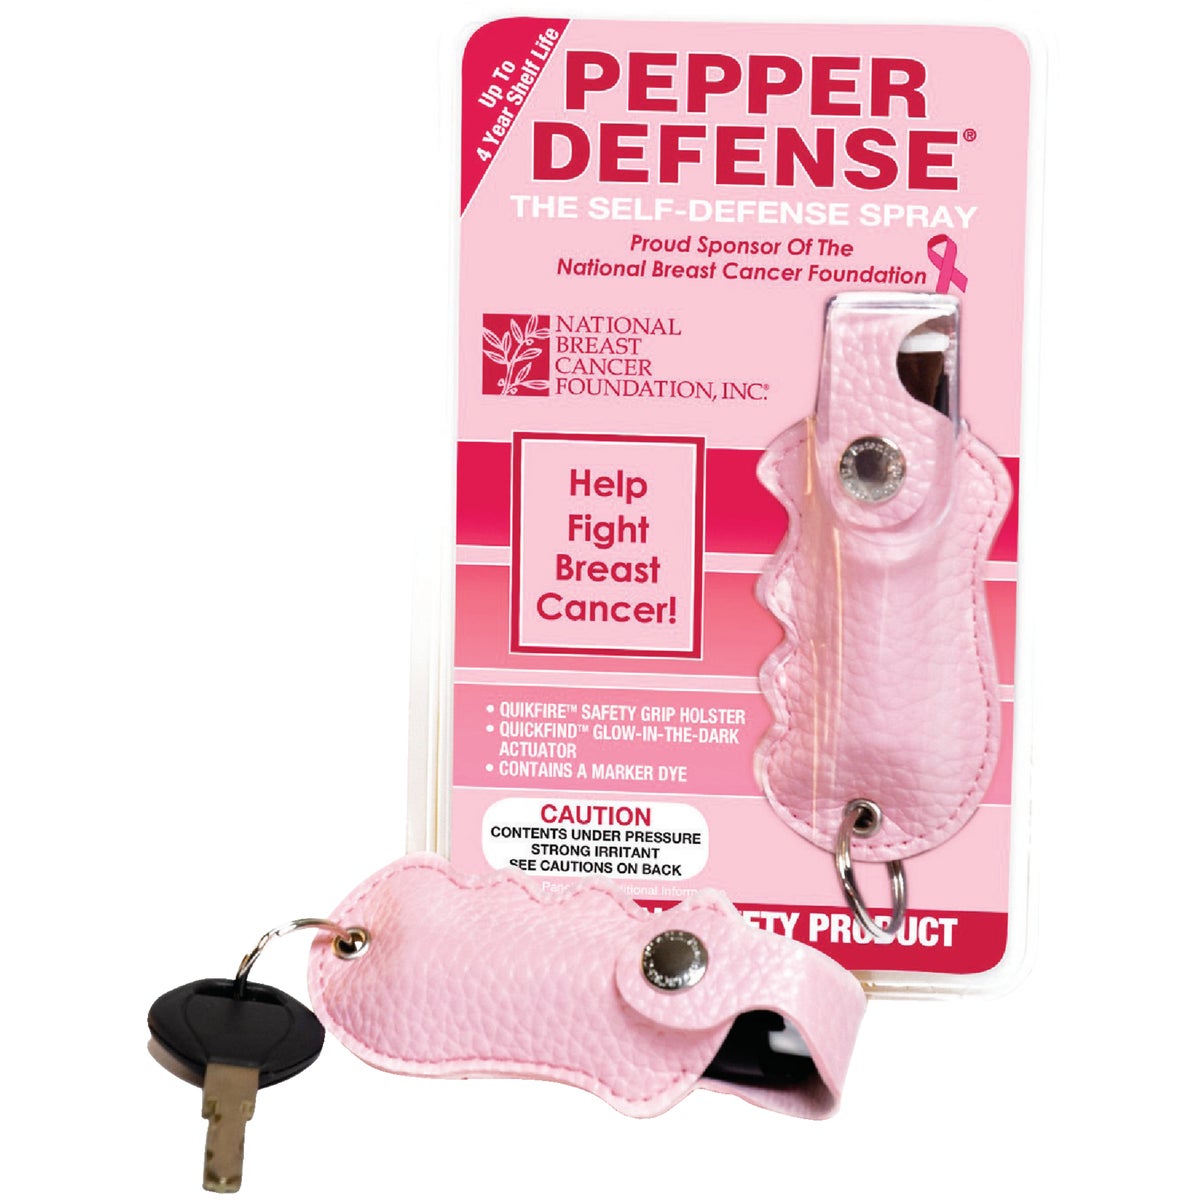 Item 820989, Protect yourself with Pepper Defense Self-Defense Spray.